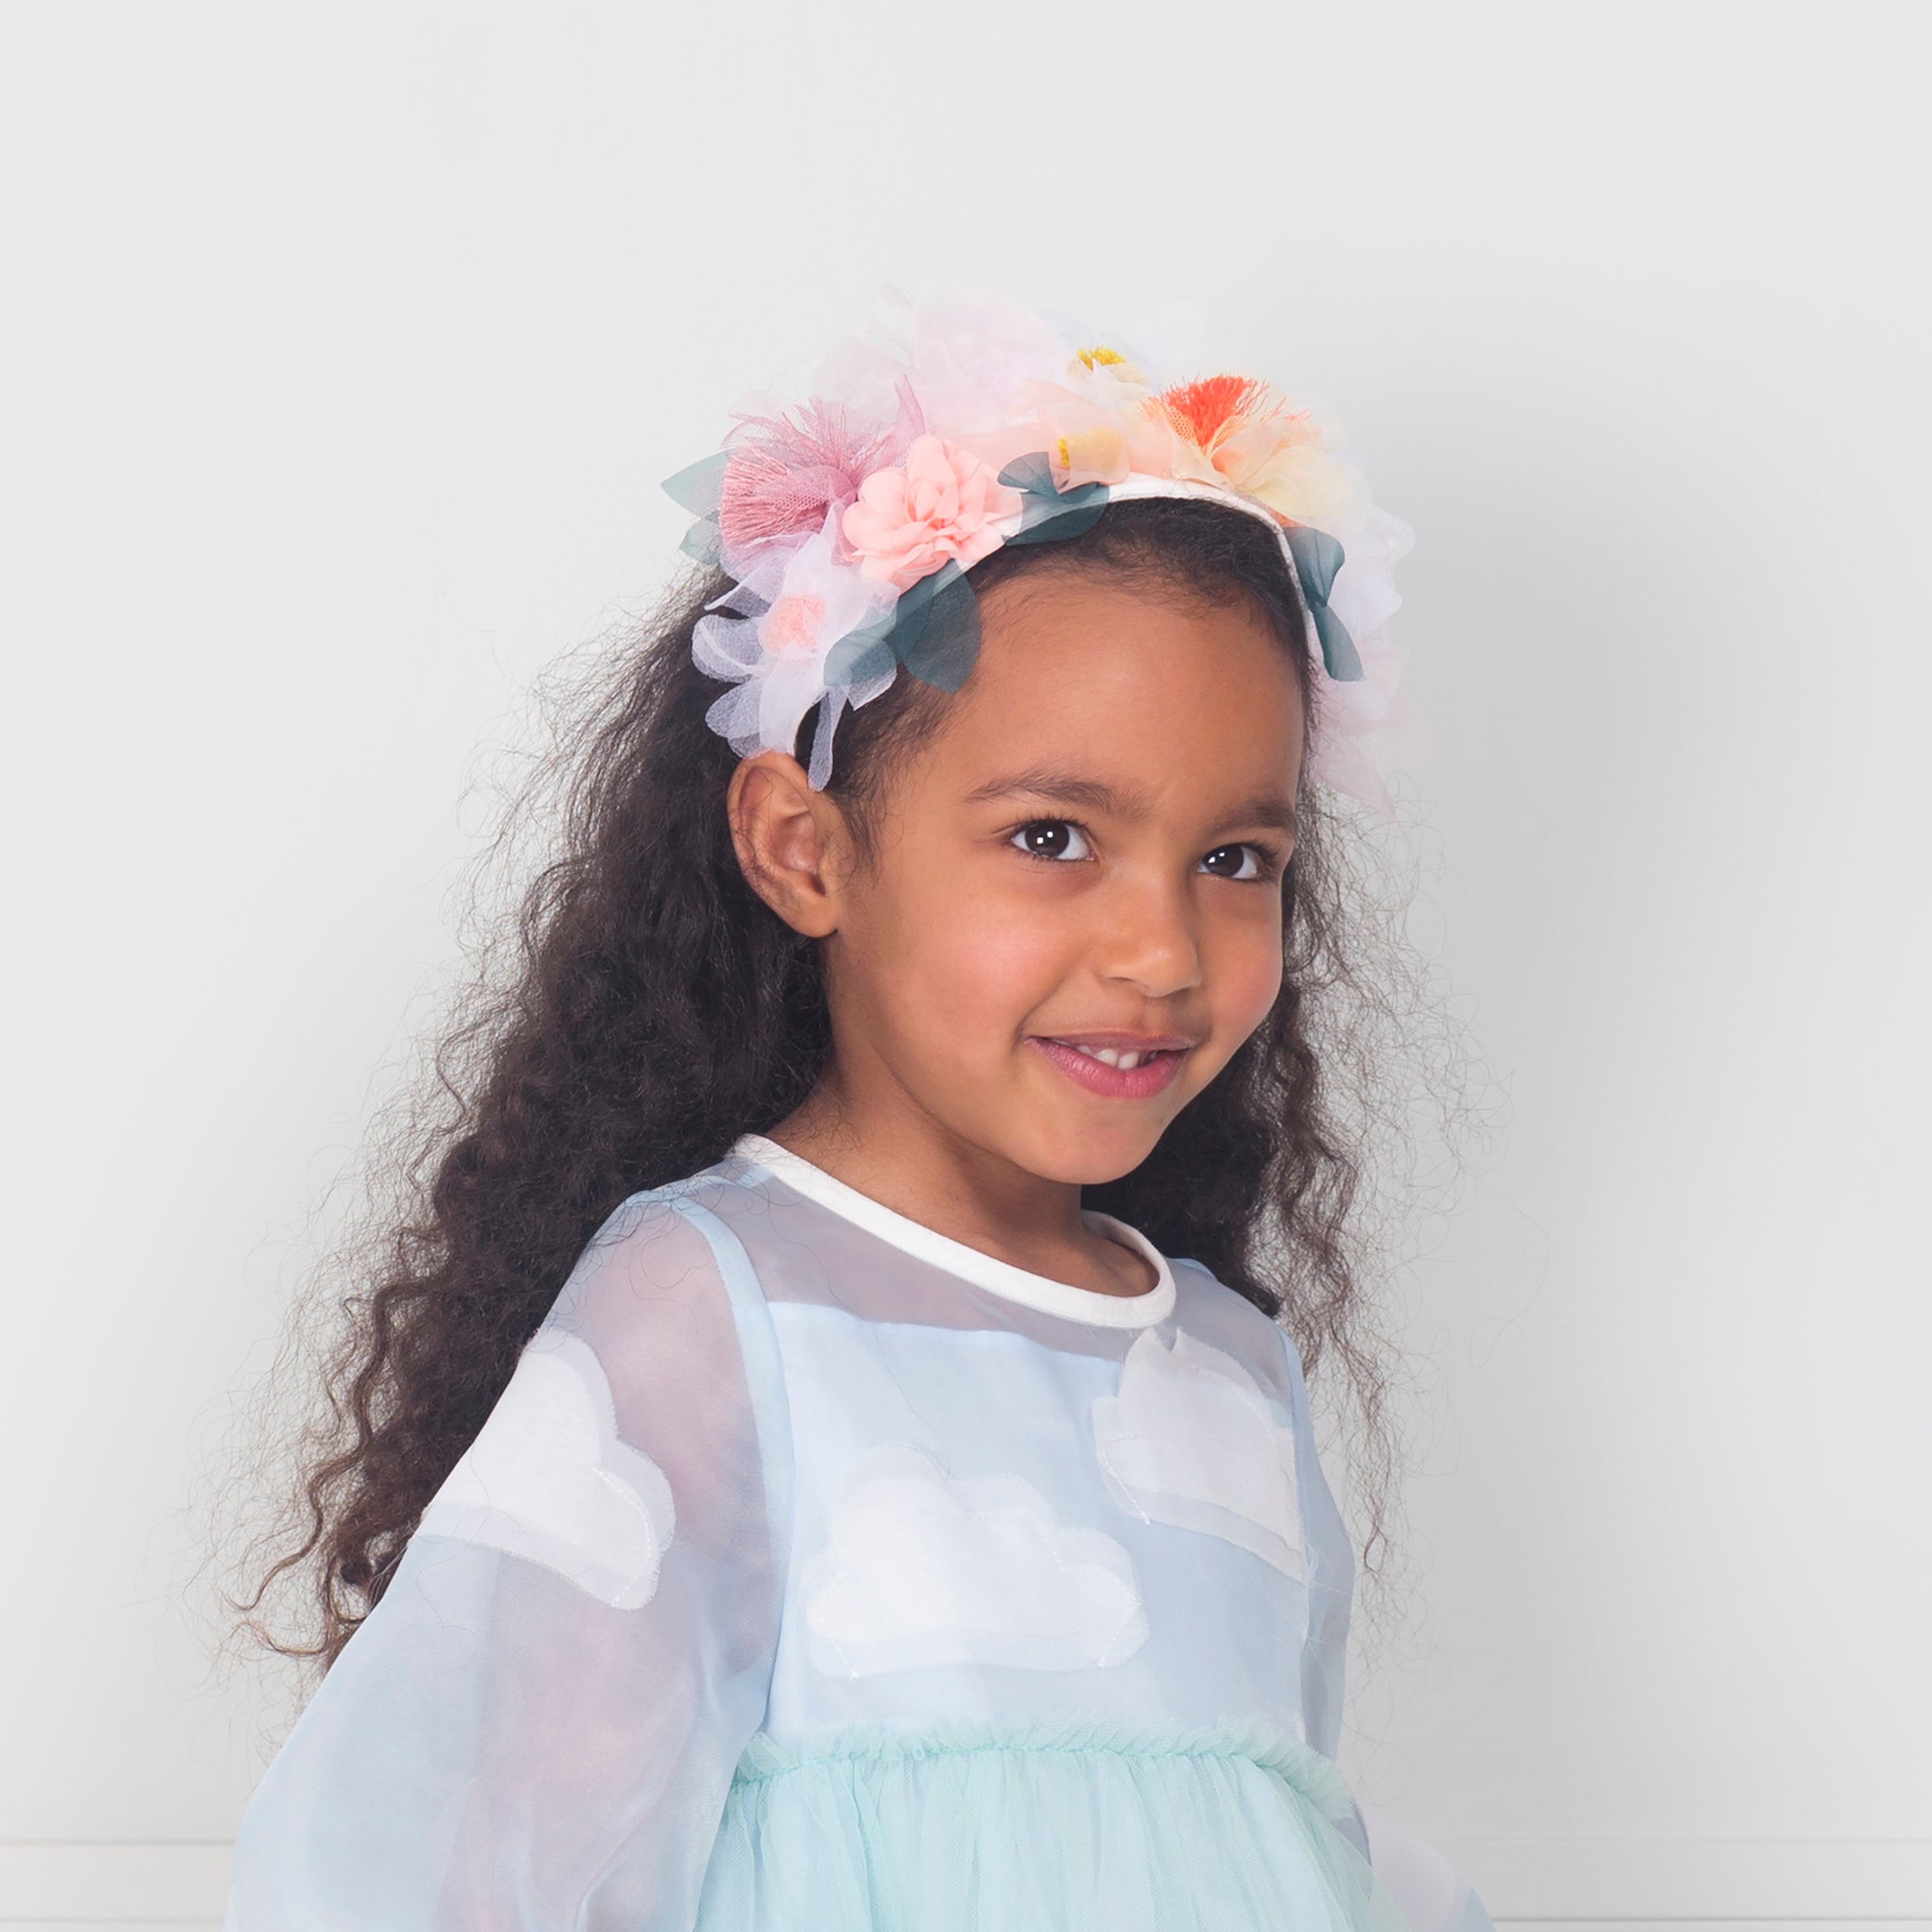 Our summery headband is embellished with organza flowers.